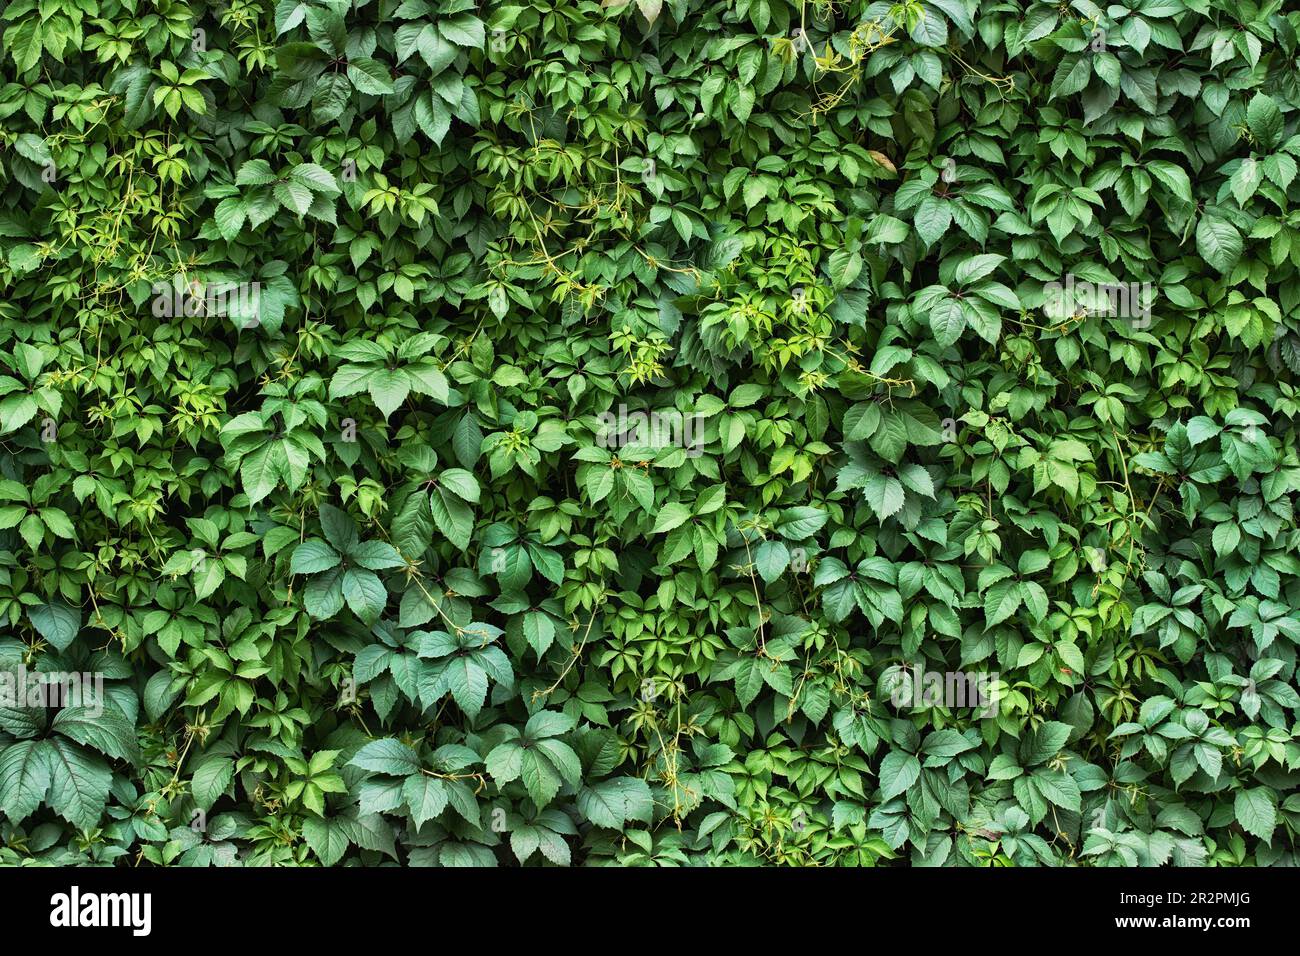 hedge ivy background. foliage of green plants Stock Photo